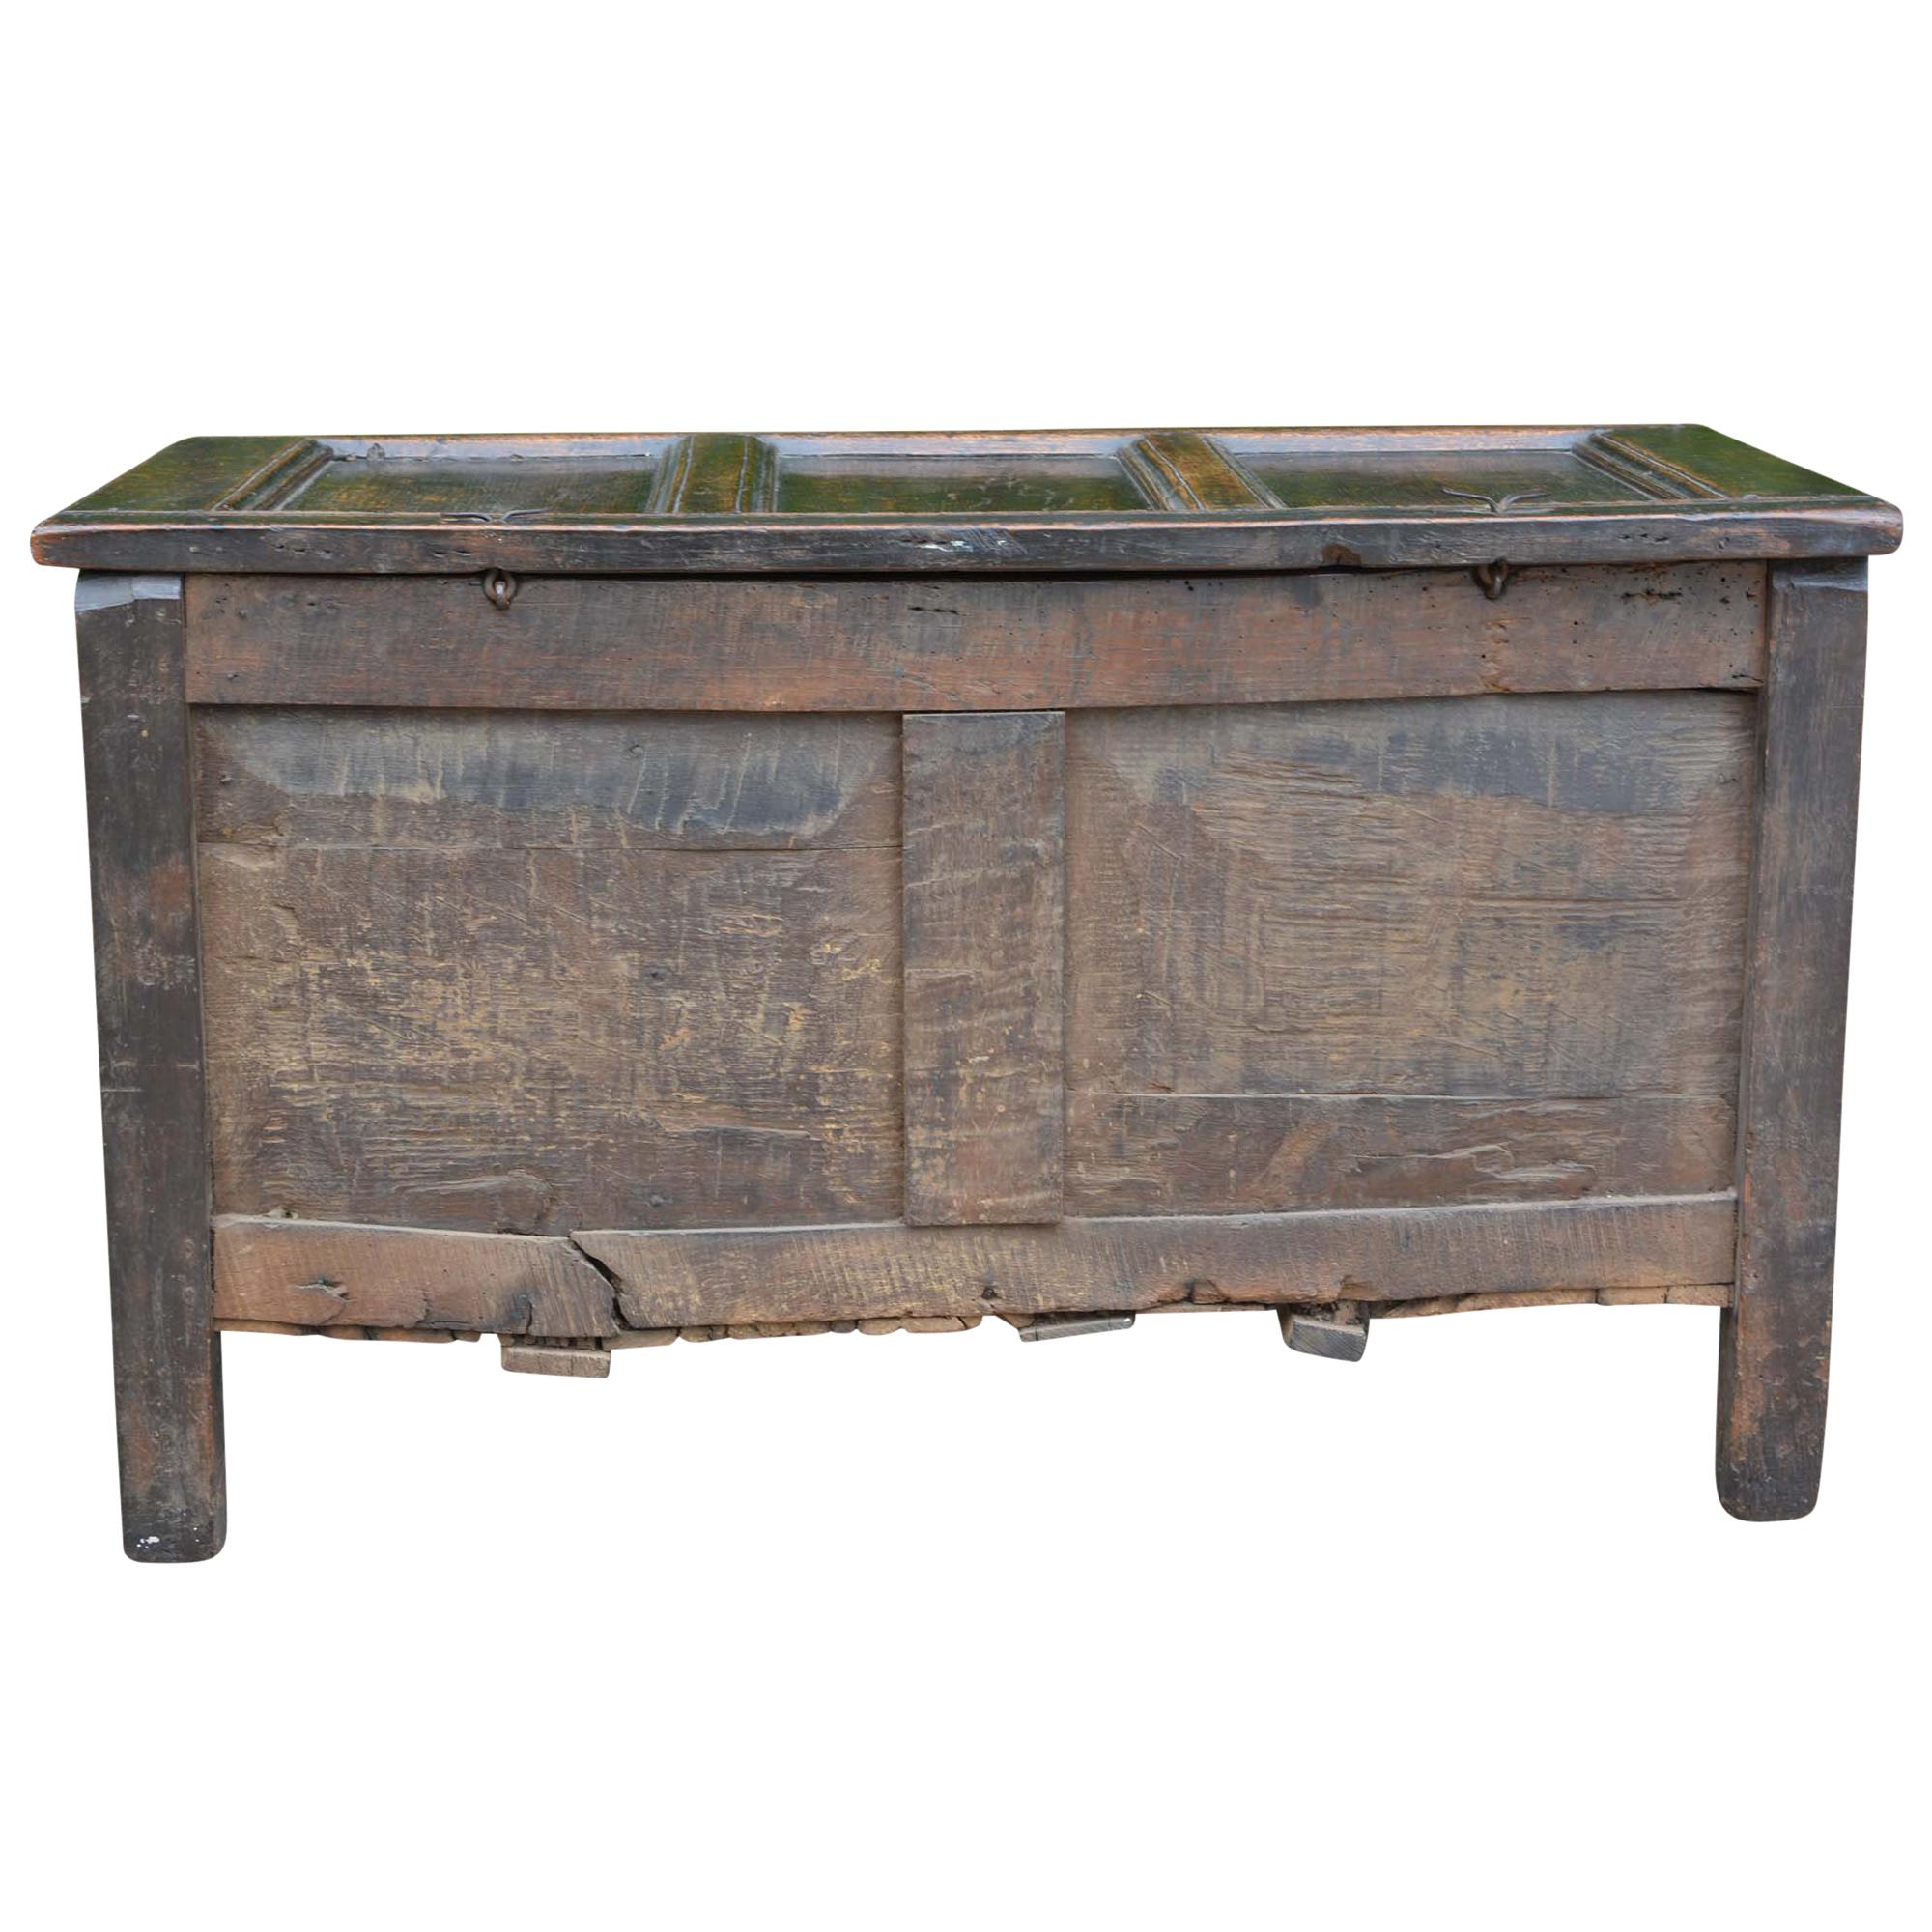 An antique English carved oak three-panel chest has beautiful patina from the centuries of use. The façade has a detailed carved, scrolled-foliate frieze with the initials “GS” on the lock plate cutout as well as diamond motifs on the lower three